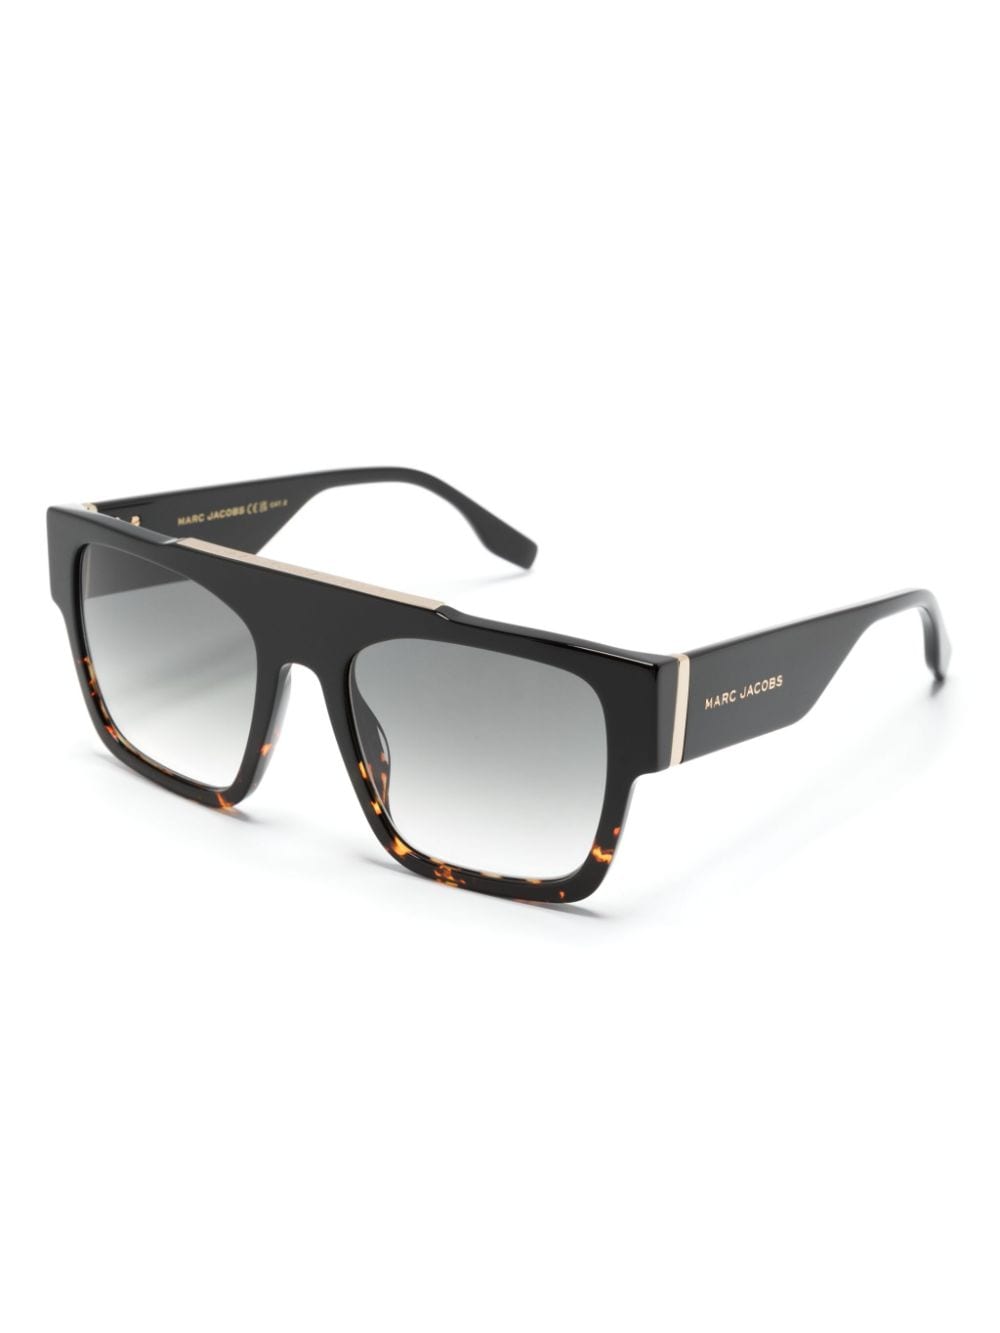 Marc Jacobs Square-frame Sunglasses In Brown